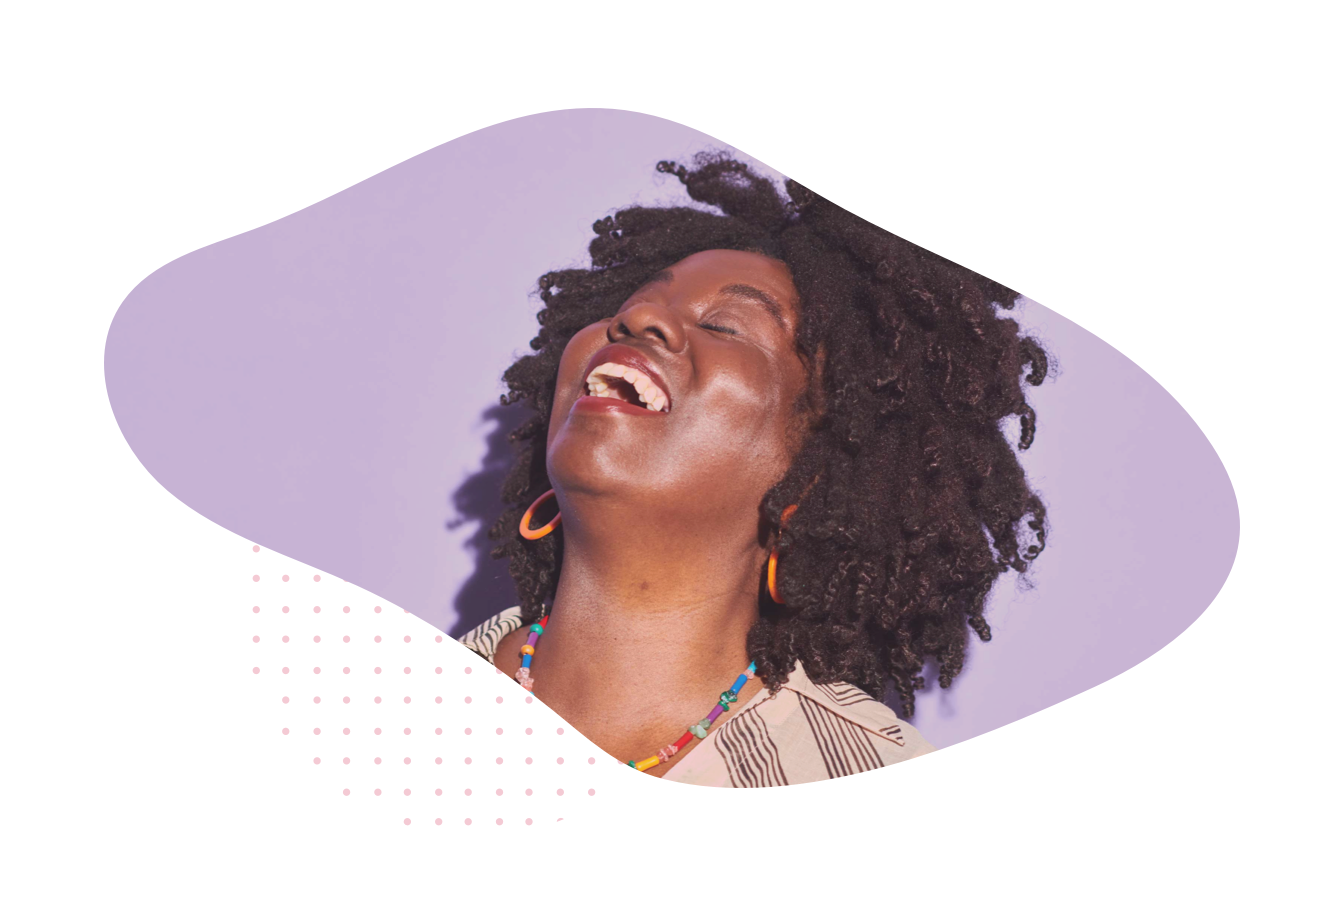 Image of a joyous Black woman with natural hair, bright colored earrings and a stripped shirt throwing her head back in laughter over a purple background is transposed into an amorphous blob shape. 